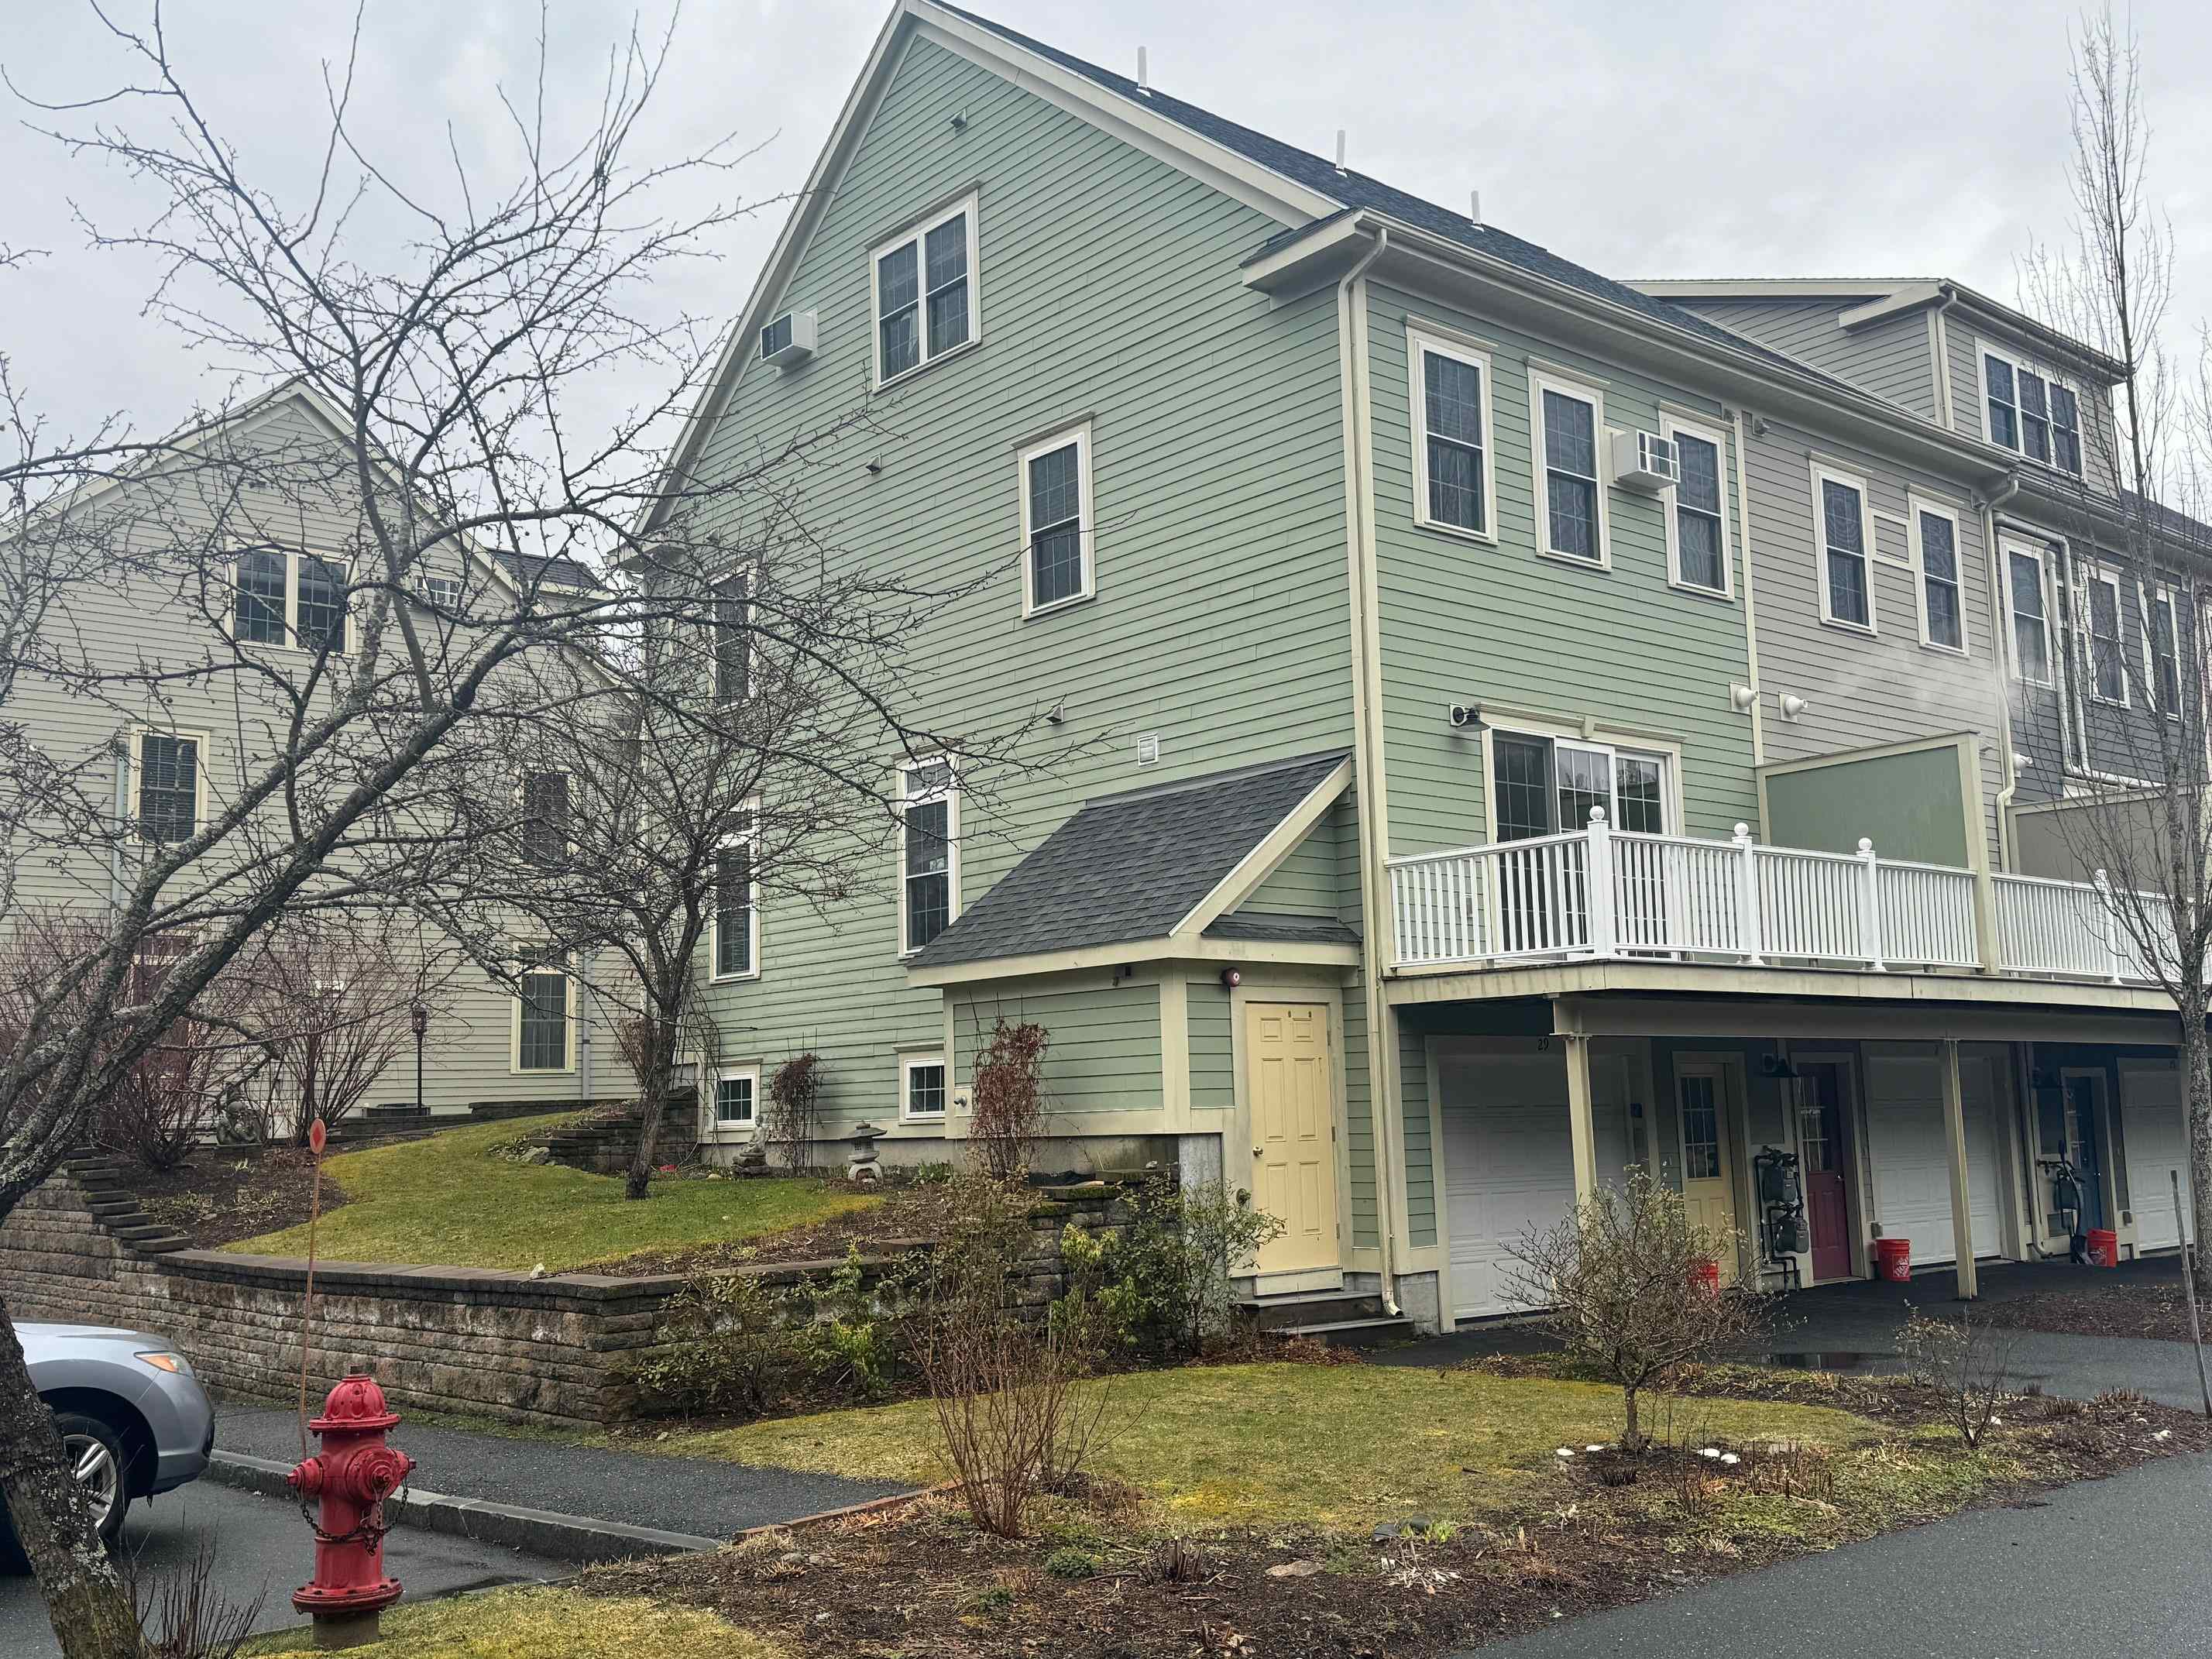 HANOVER NH Condos for sale